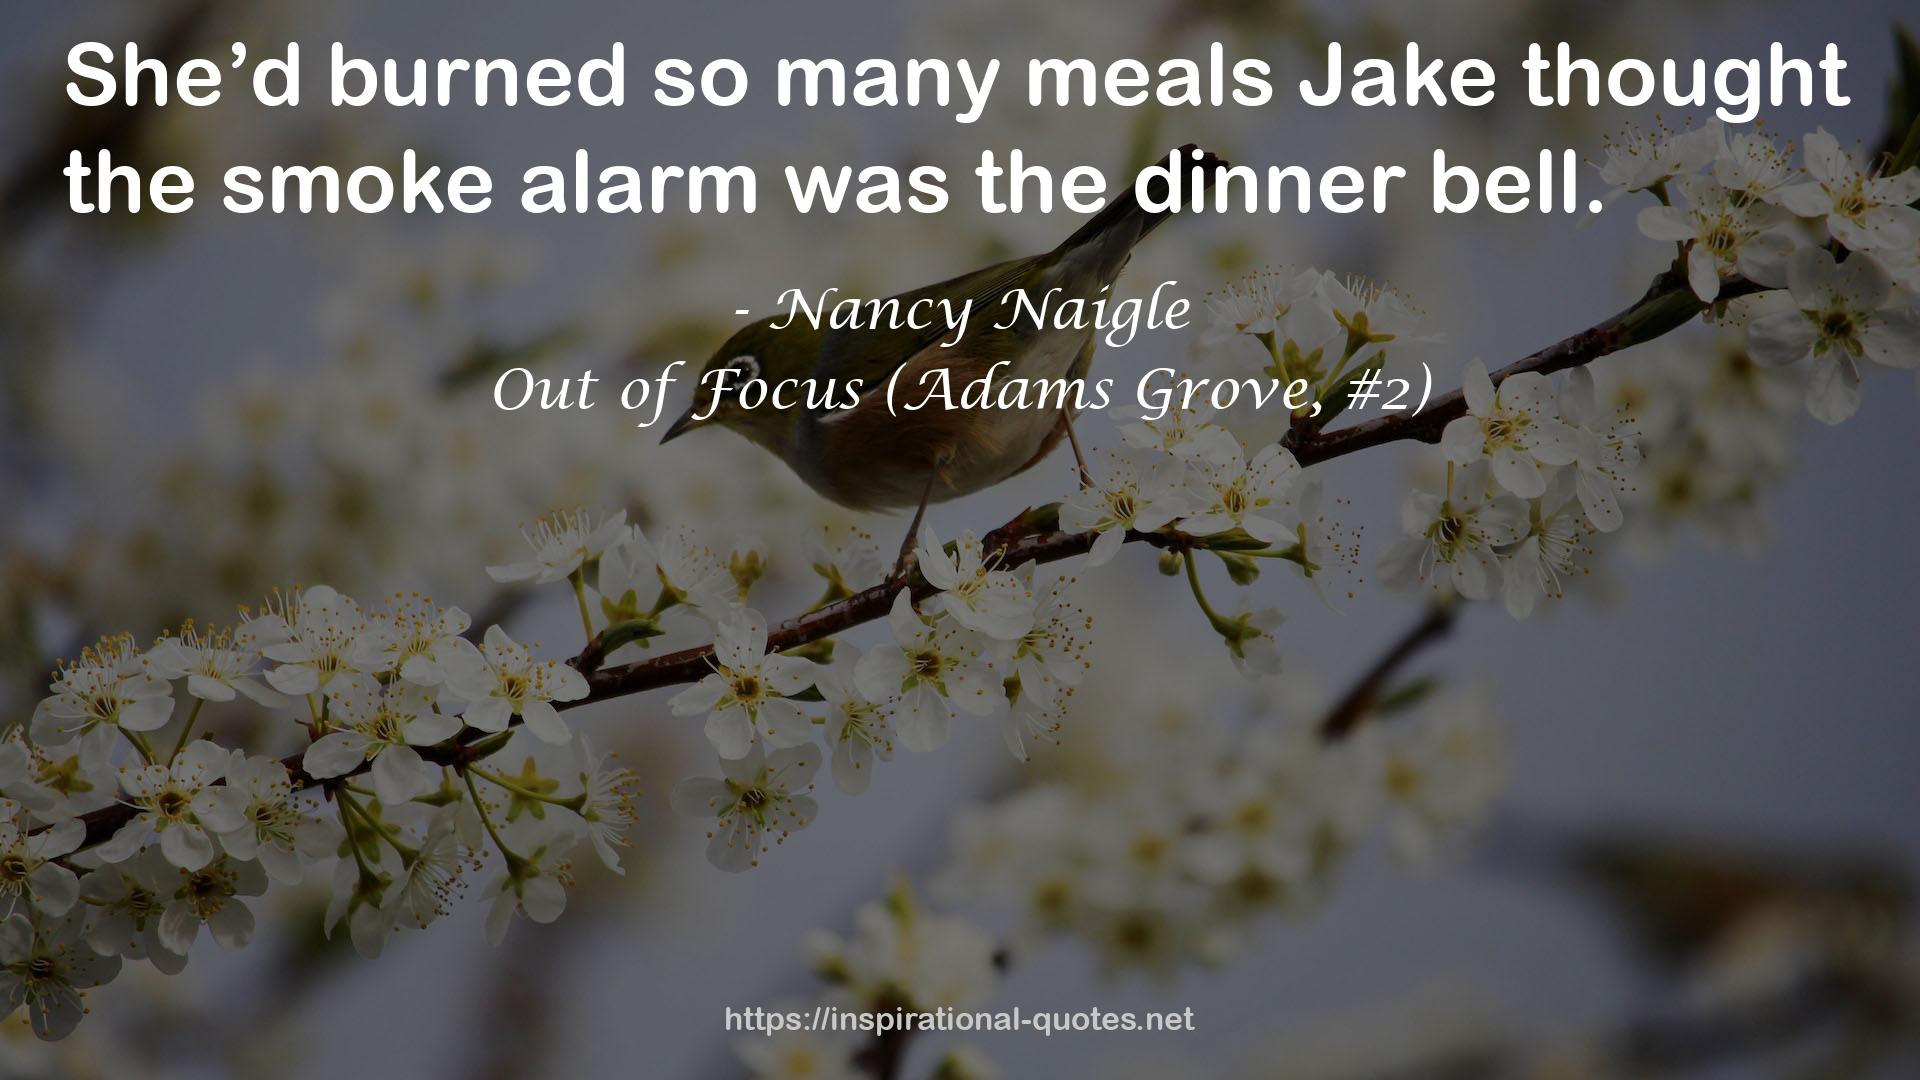 Out of Focus (Adams Grove, #2) QUOTES